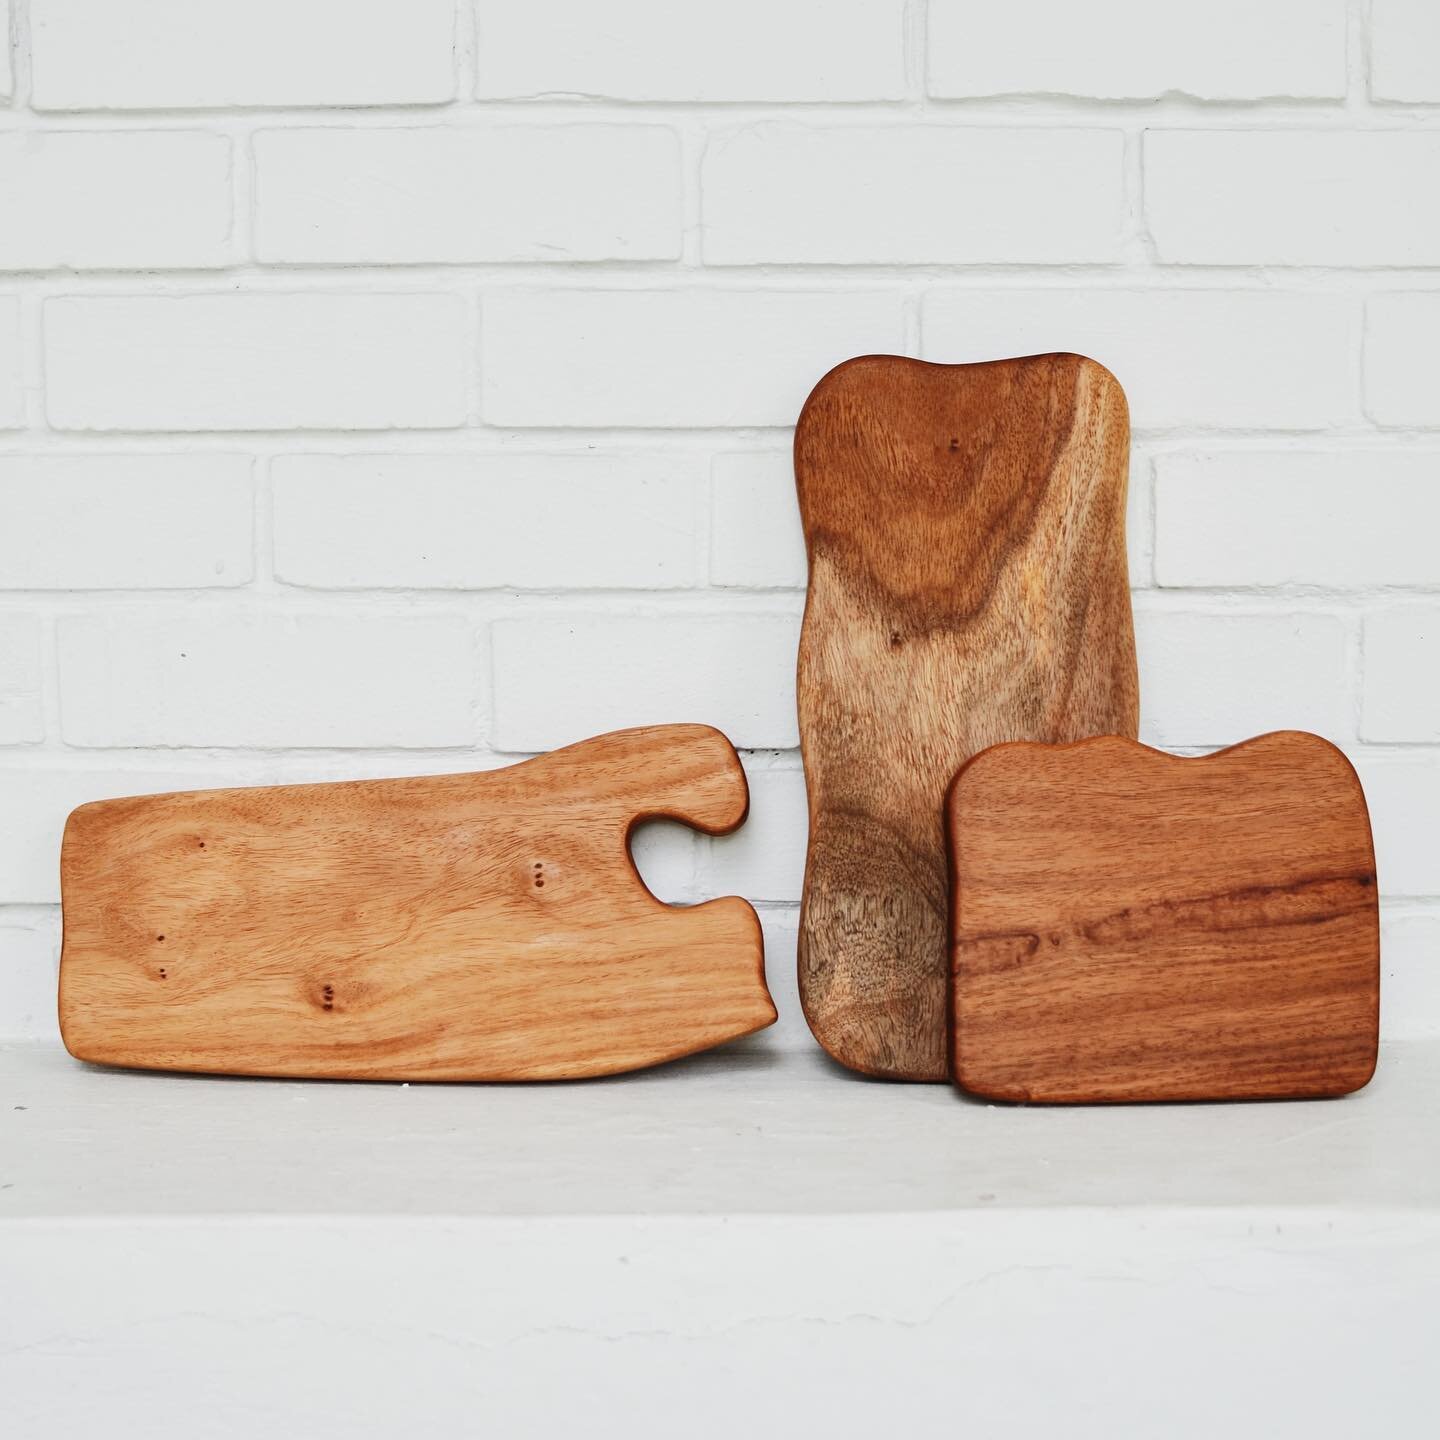 Wholesale inquiries are welcome! Our products are designed and sustainably handcrafted in Singapore using local timber😊 #sustainableliving #sustainability #localtimber #sgmakers #sghandmade #fallentrees #sustainable #sglocal #supportlocal